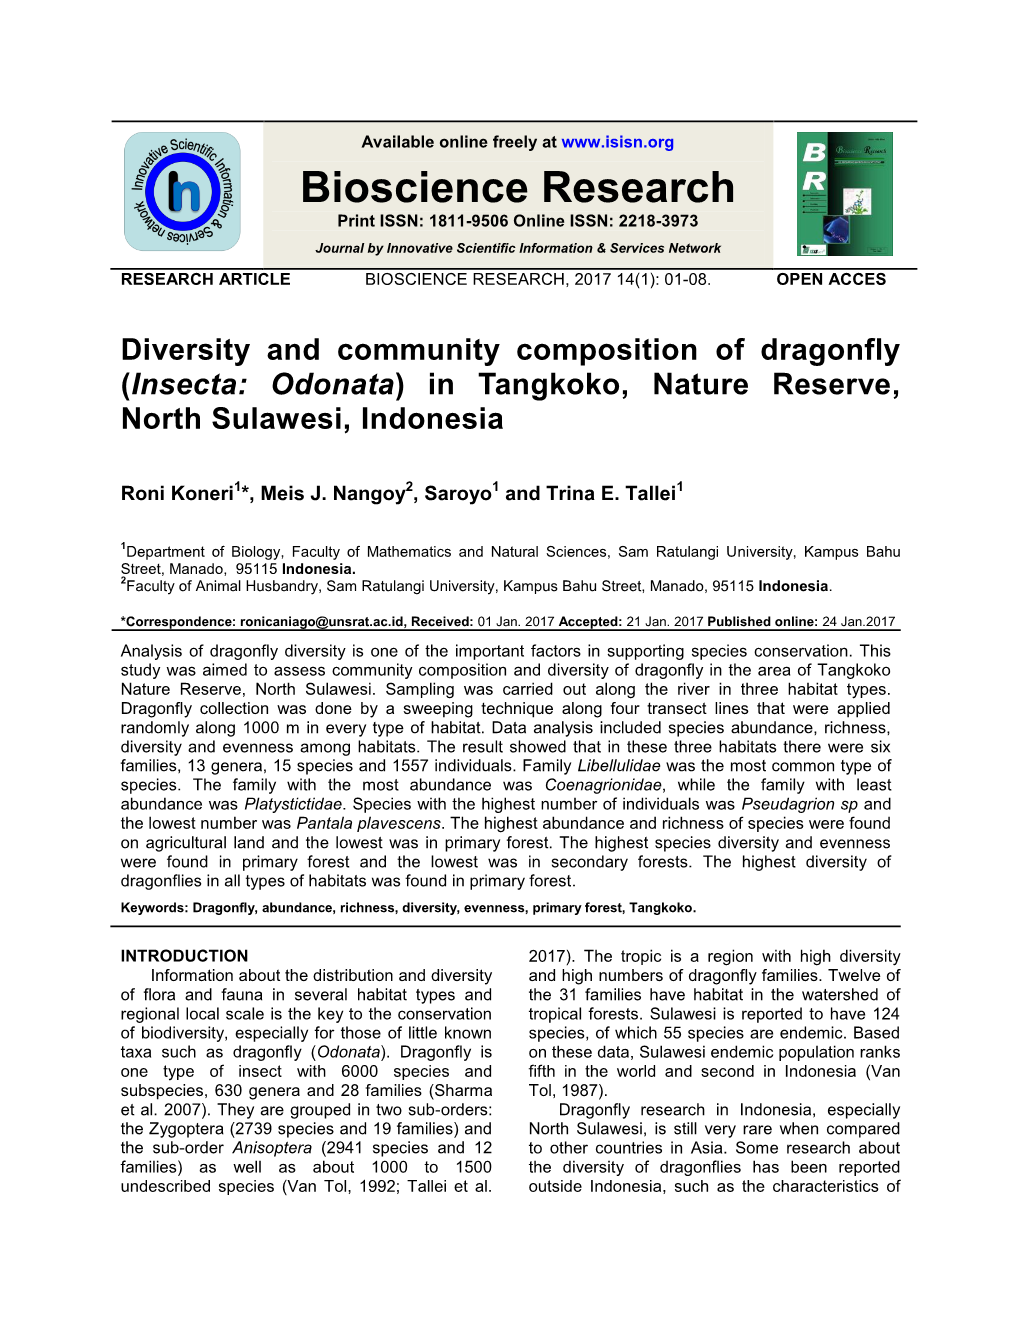 Diversity and Community Composition of Dragonfly (Insecta: Odonata) in Tangkoko, Nature Reserve, North Sulawesi, Indonesia